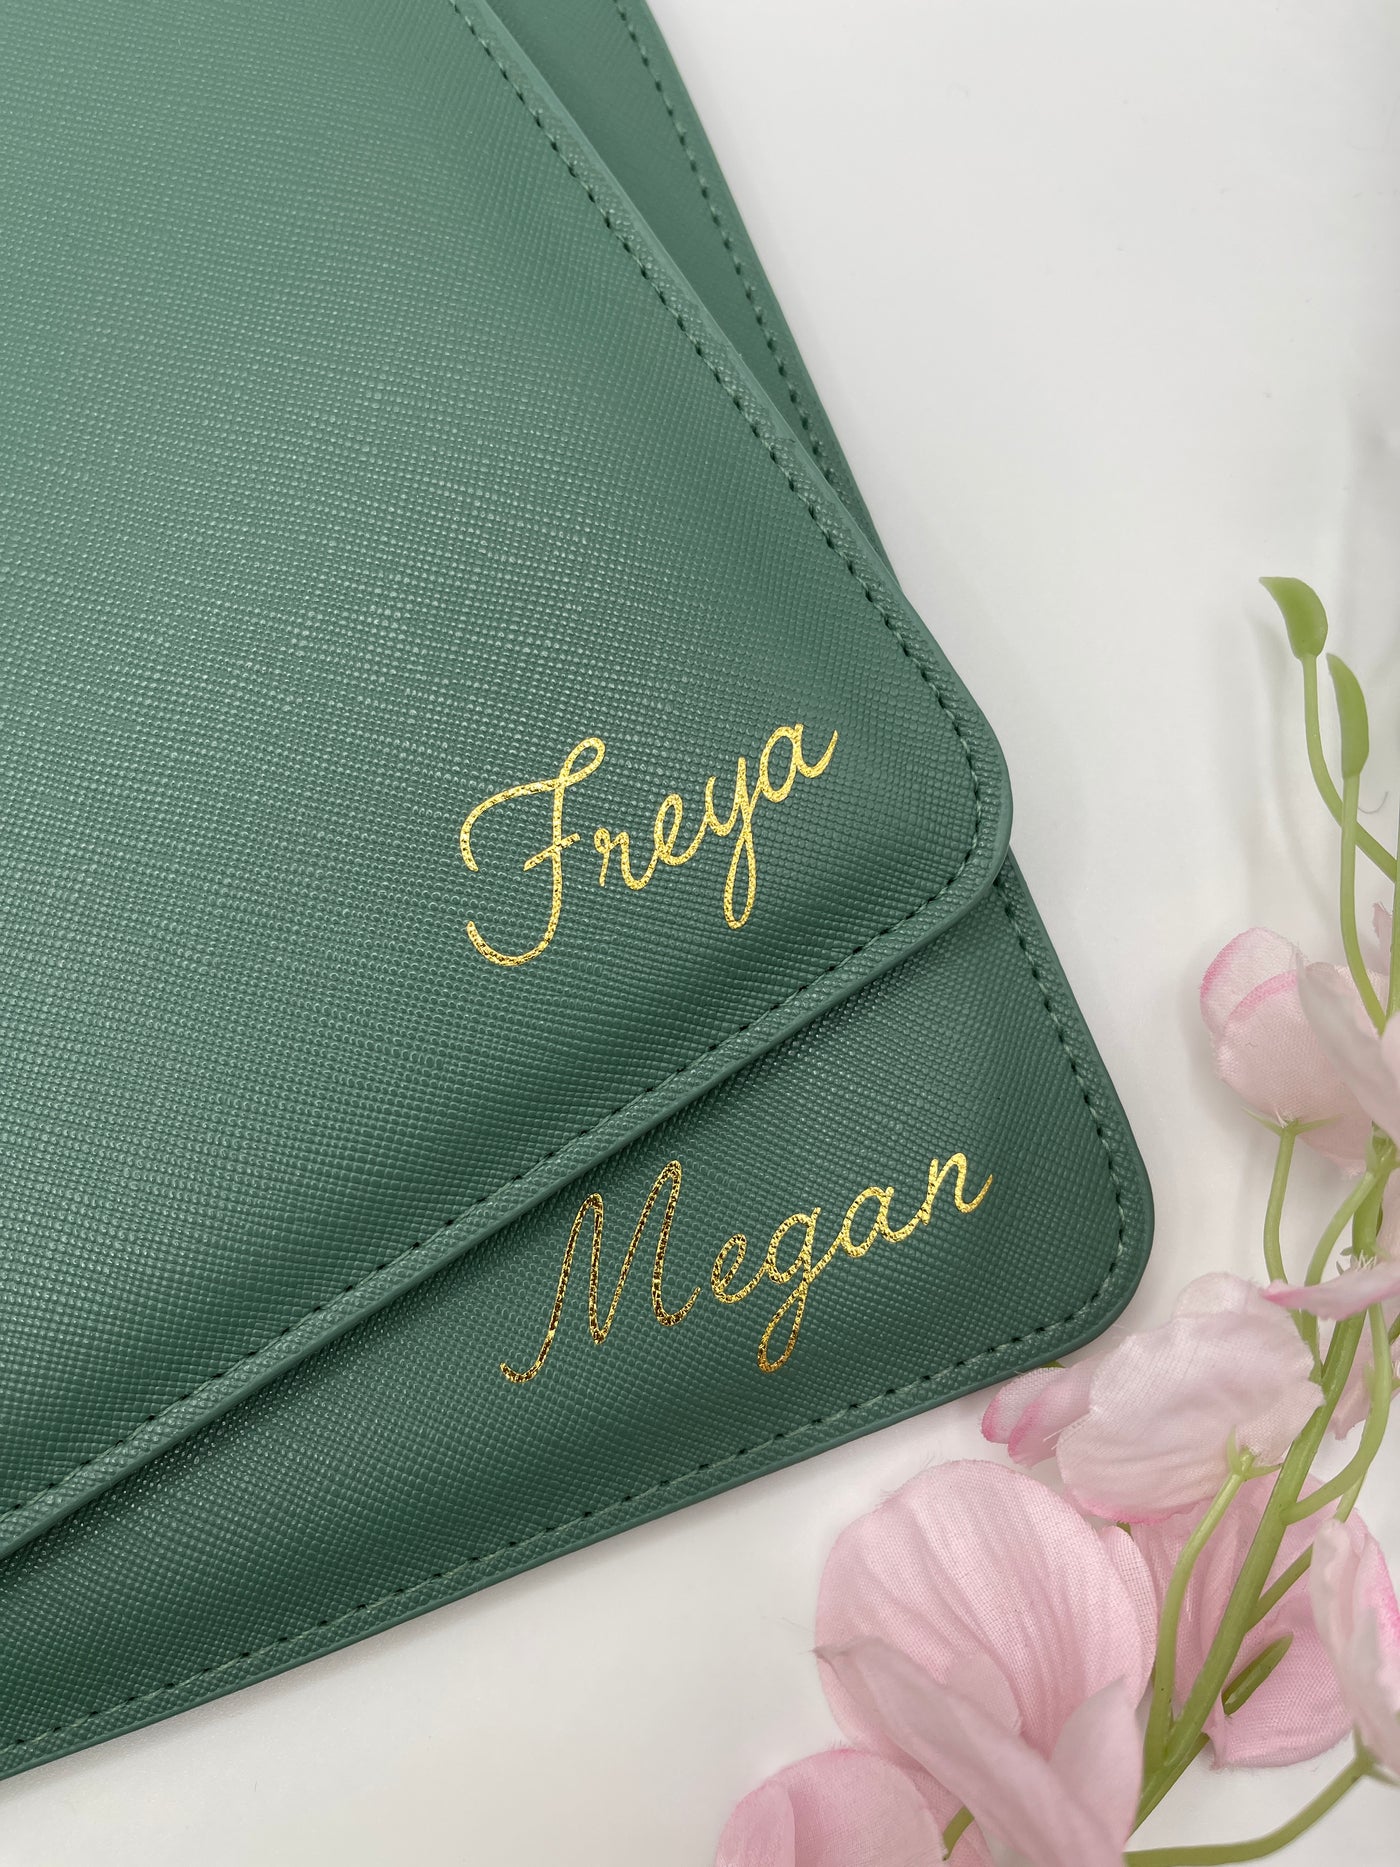 Personalised name clutch bag for bridesmaid gift